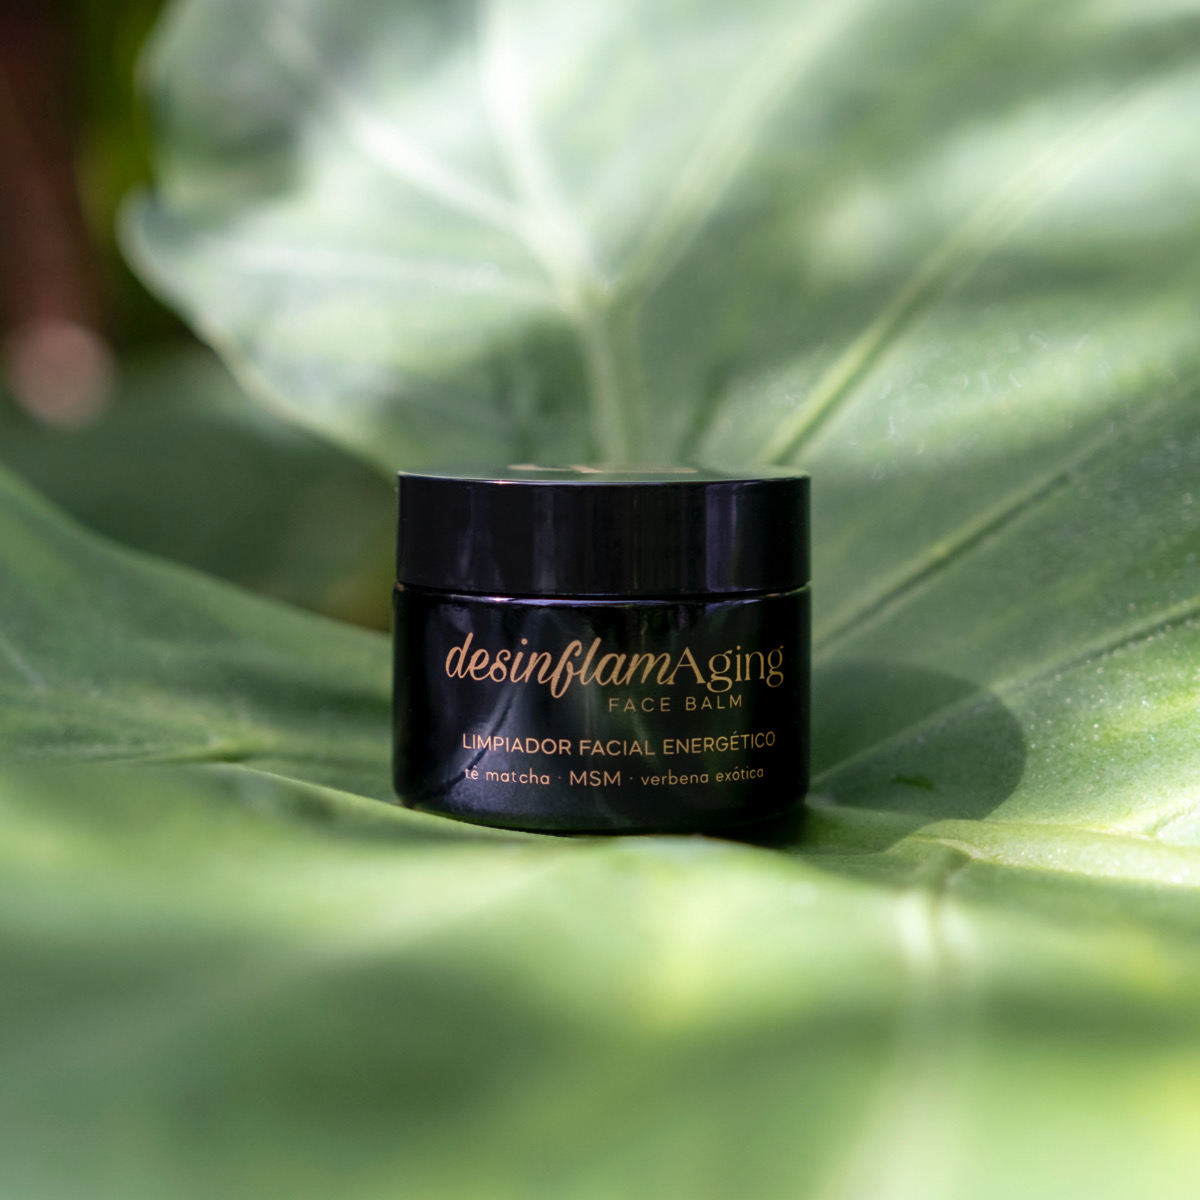 Desinflam.Aging face balm